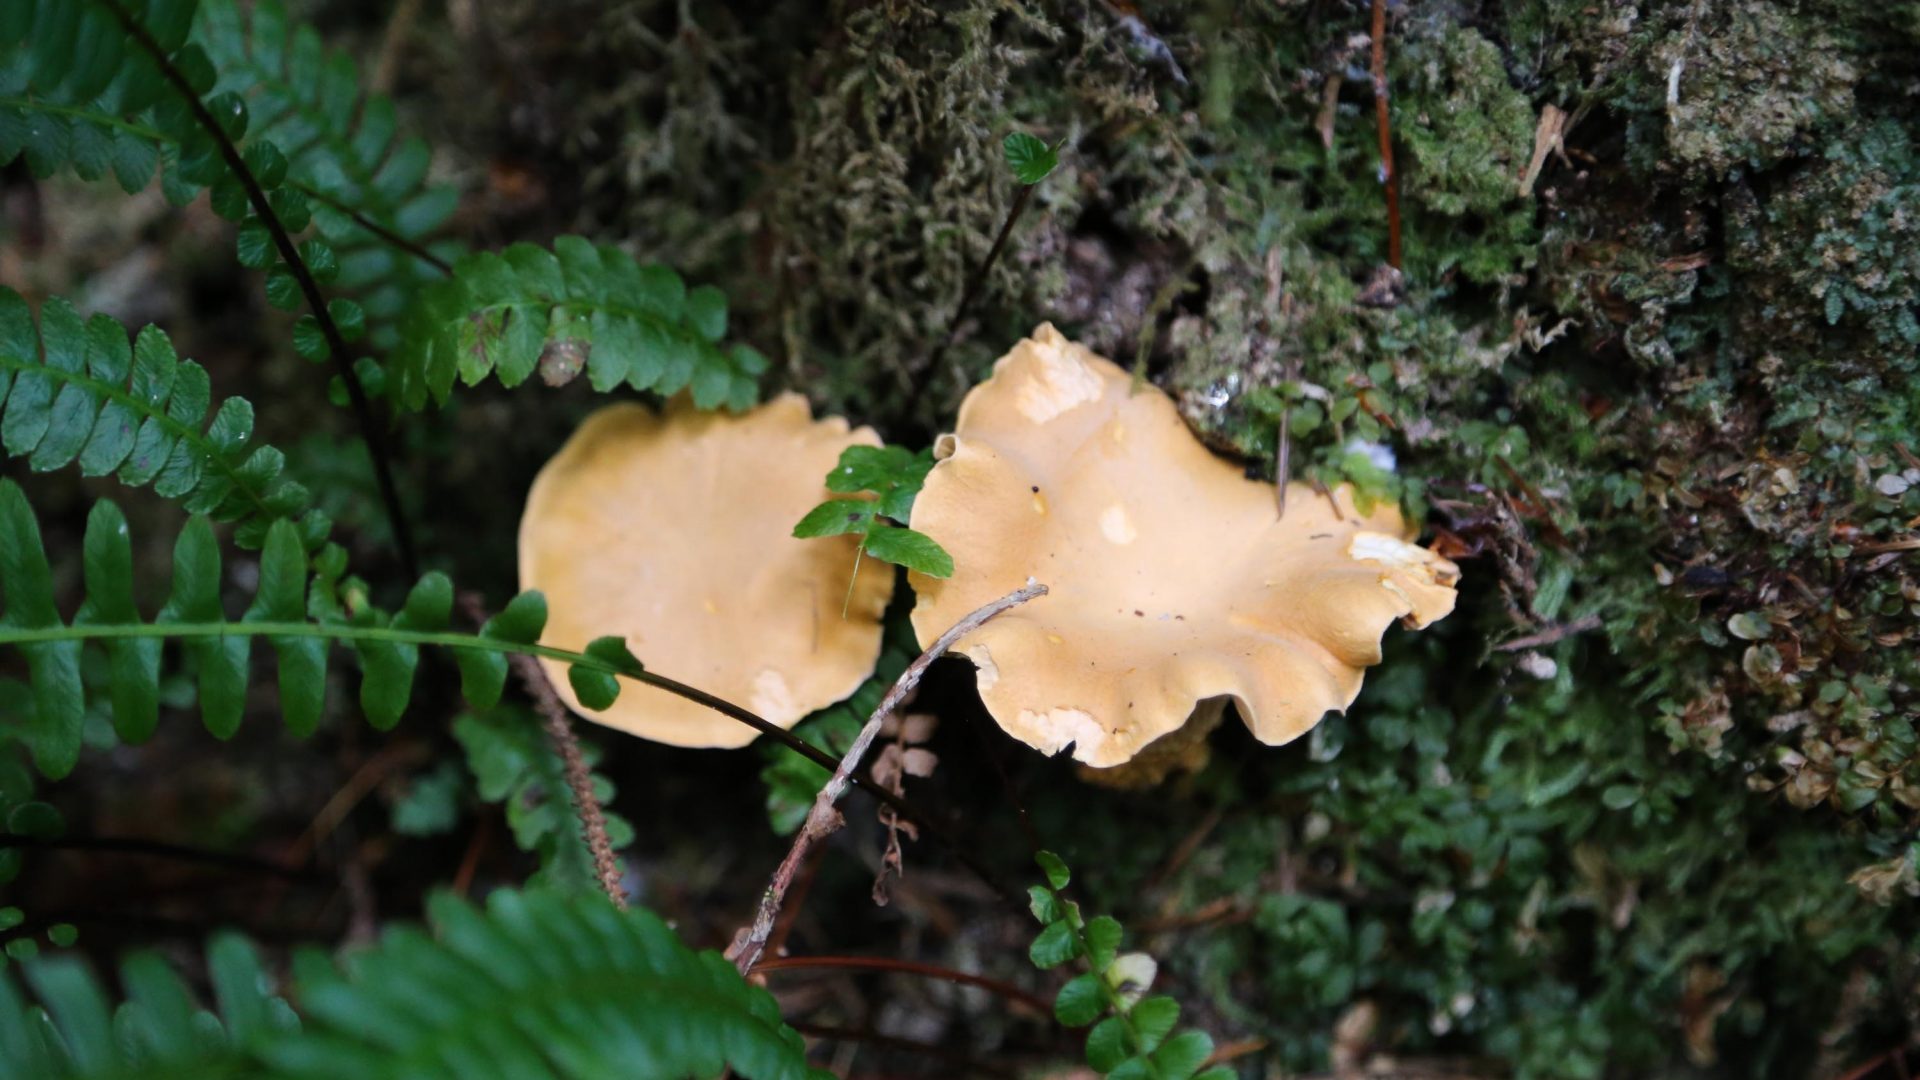 A pair of chanterelles waiting to be plucked from the ground on Vancouver Island.